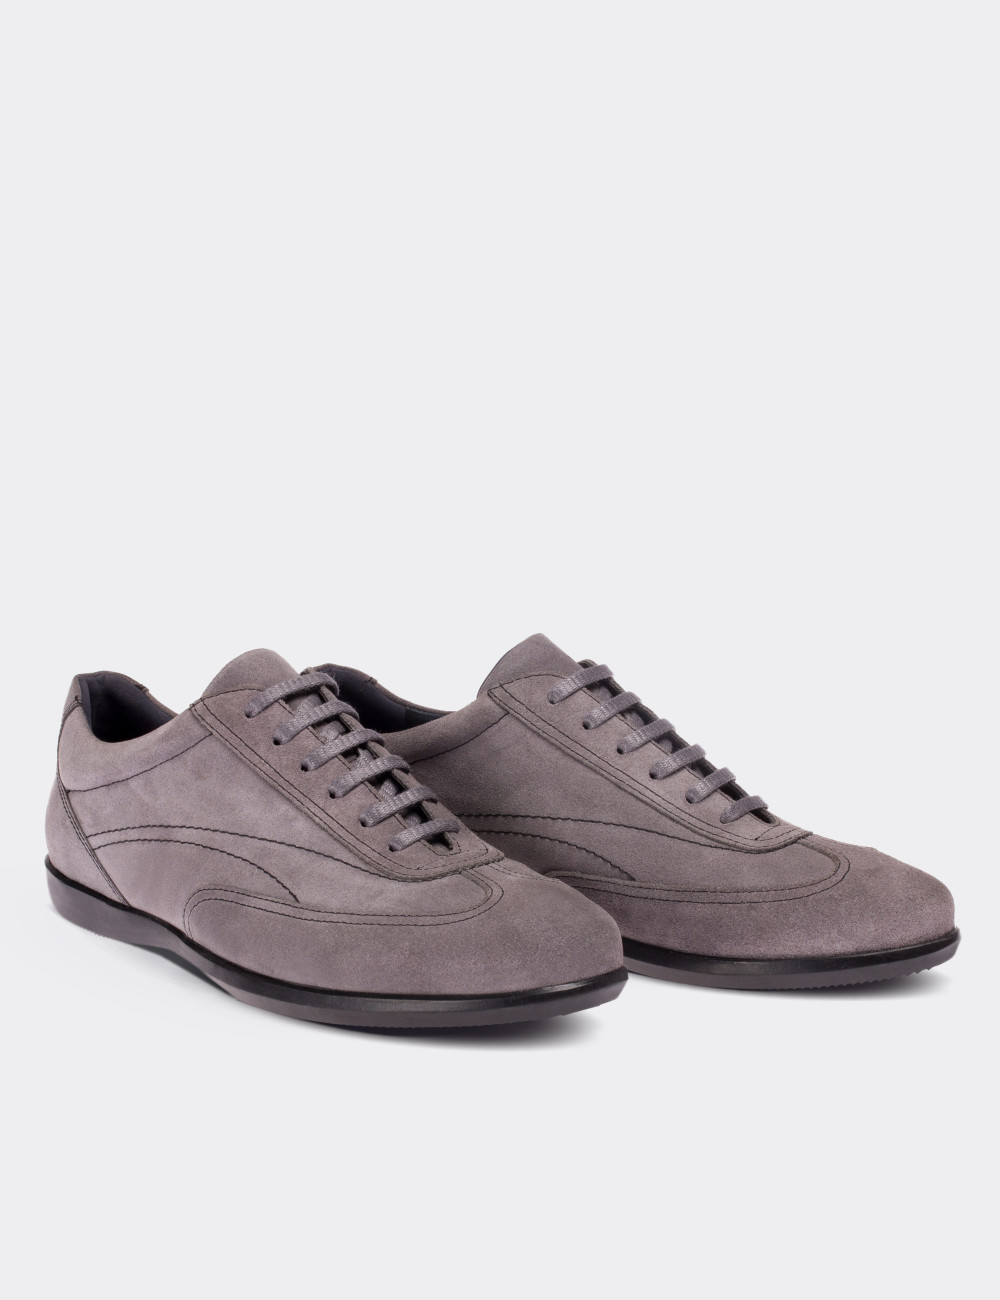 Gray Suede Leather Lace-up Shoes - 00321MGRIC02